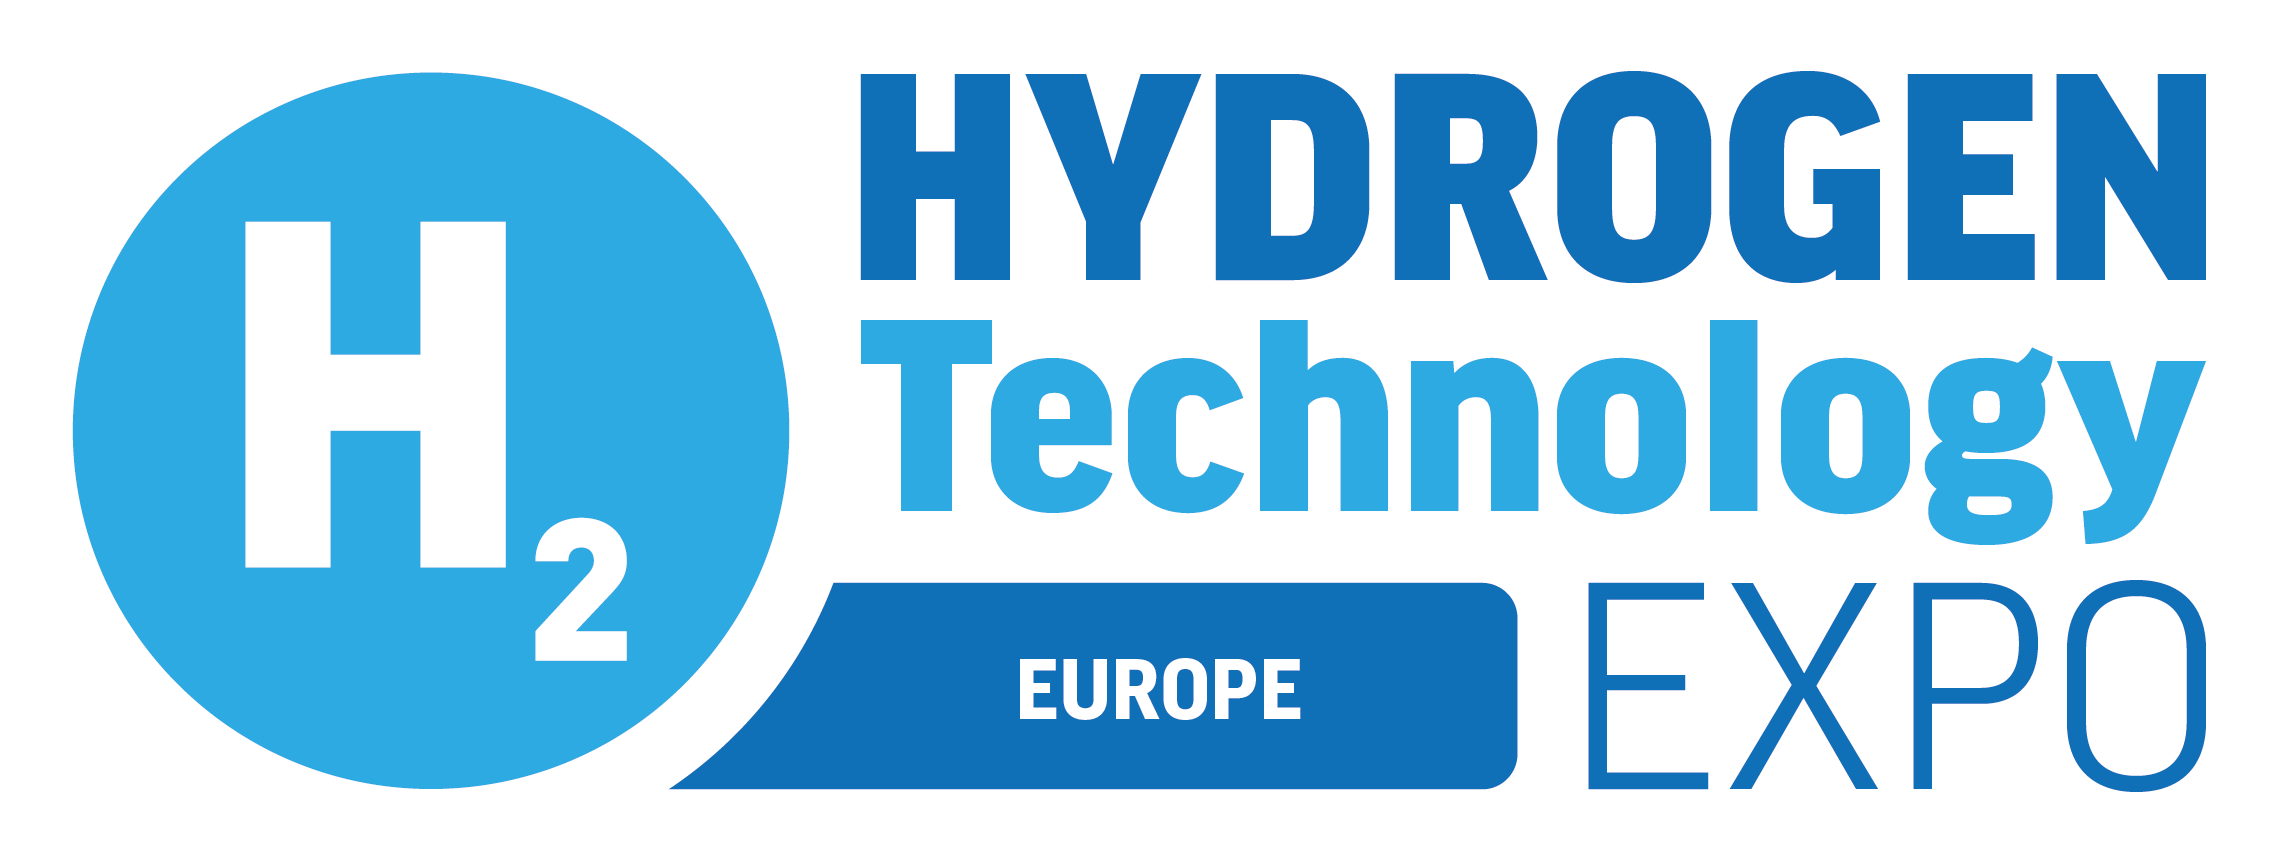 Hydrogen Technology Conference & Expo